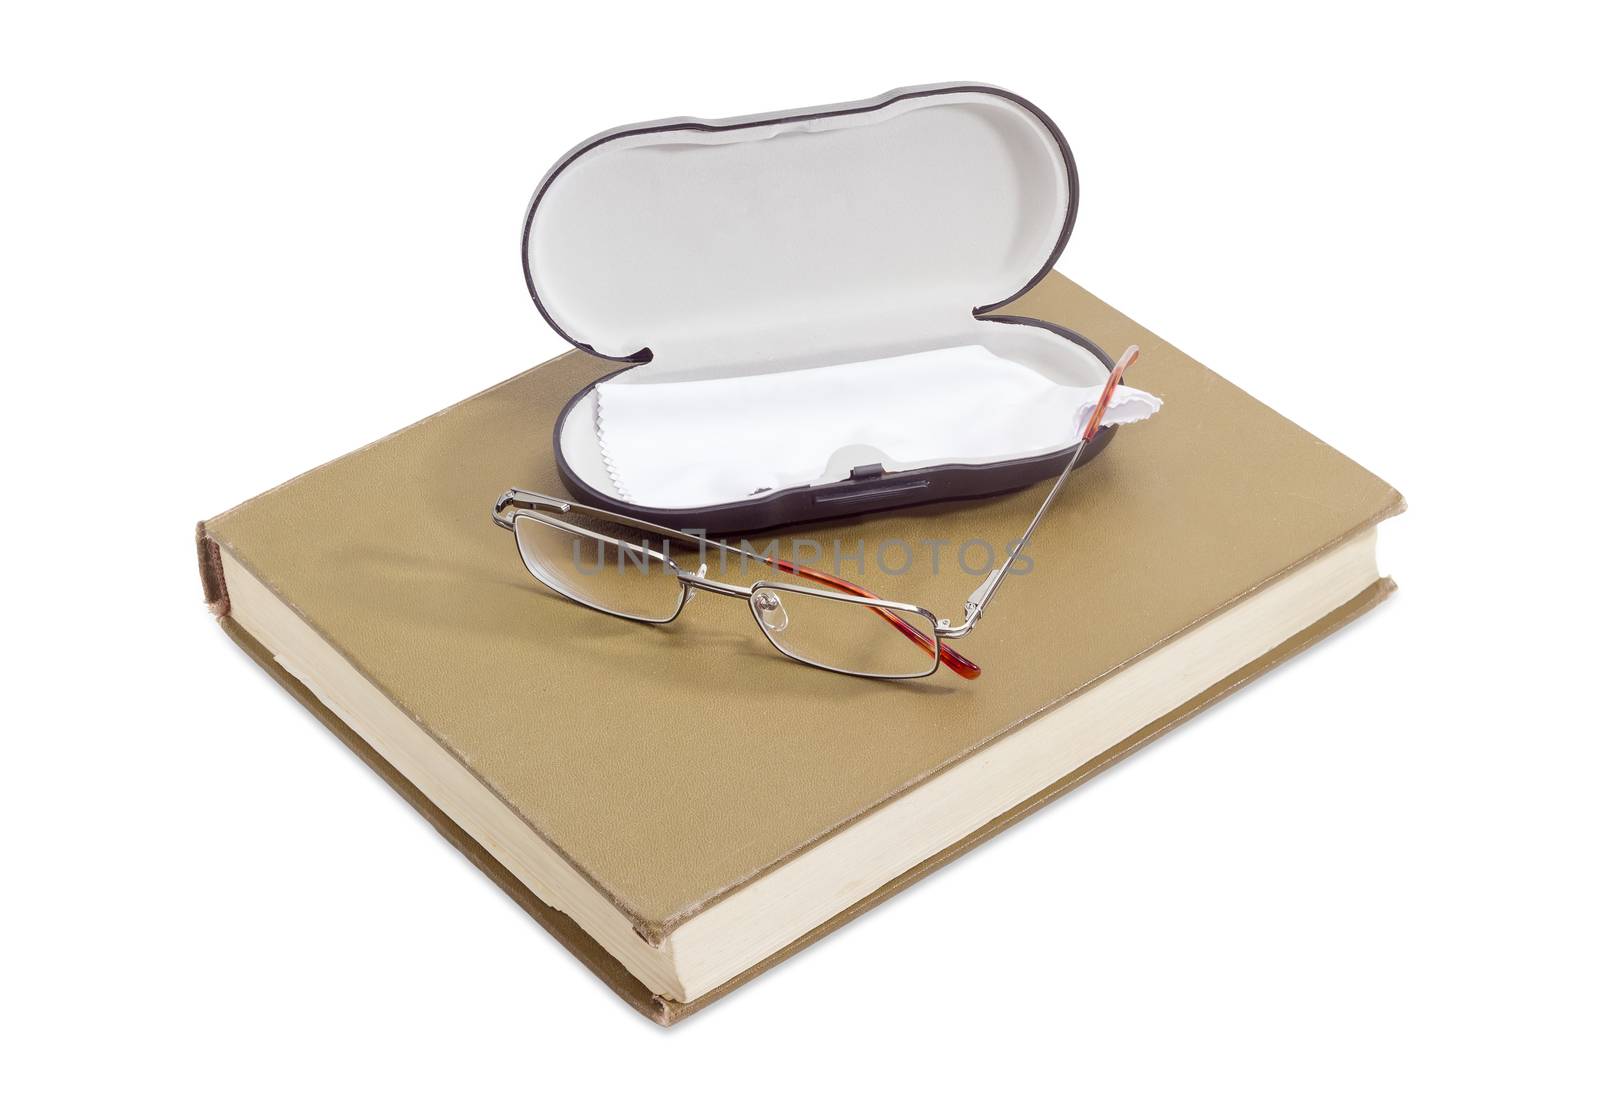 Modern classic mens eyeglasses and case on the book by anmbph